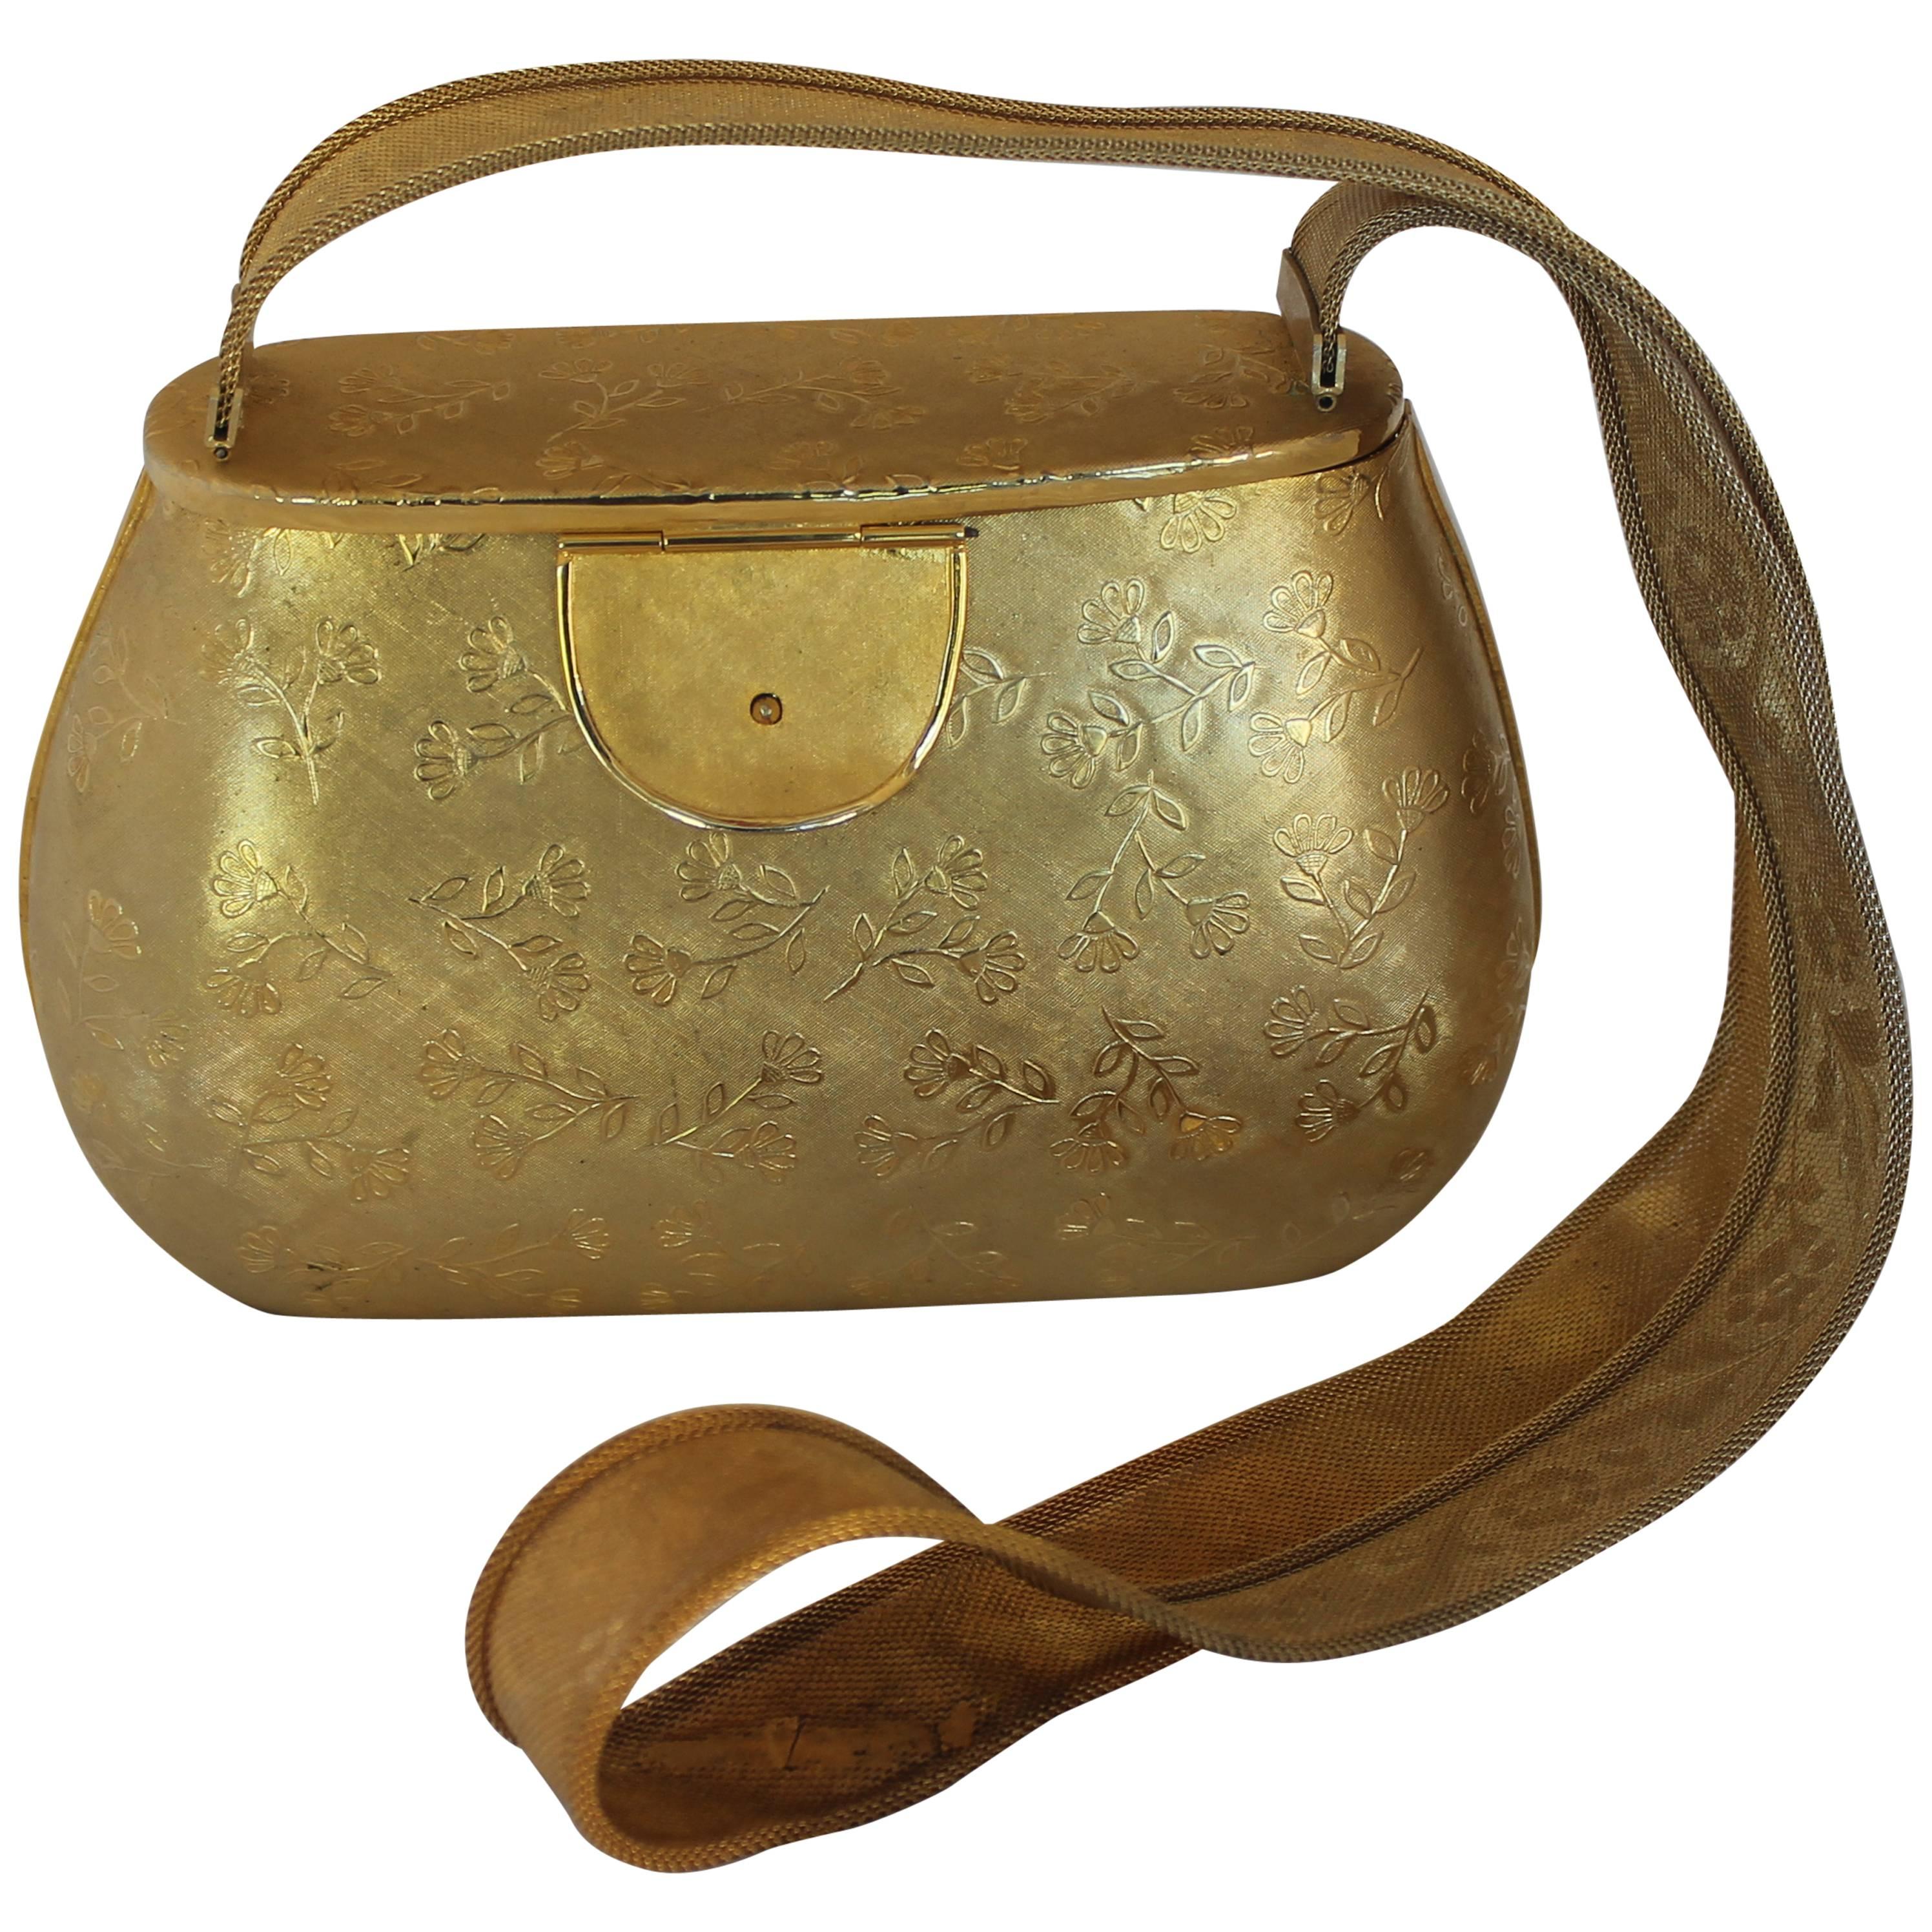 Rosenfeld Gold Fully Etched Metal Shoulder Bag with Mesh Strap - circa 1960's 